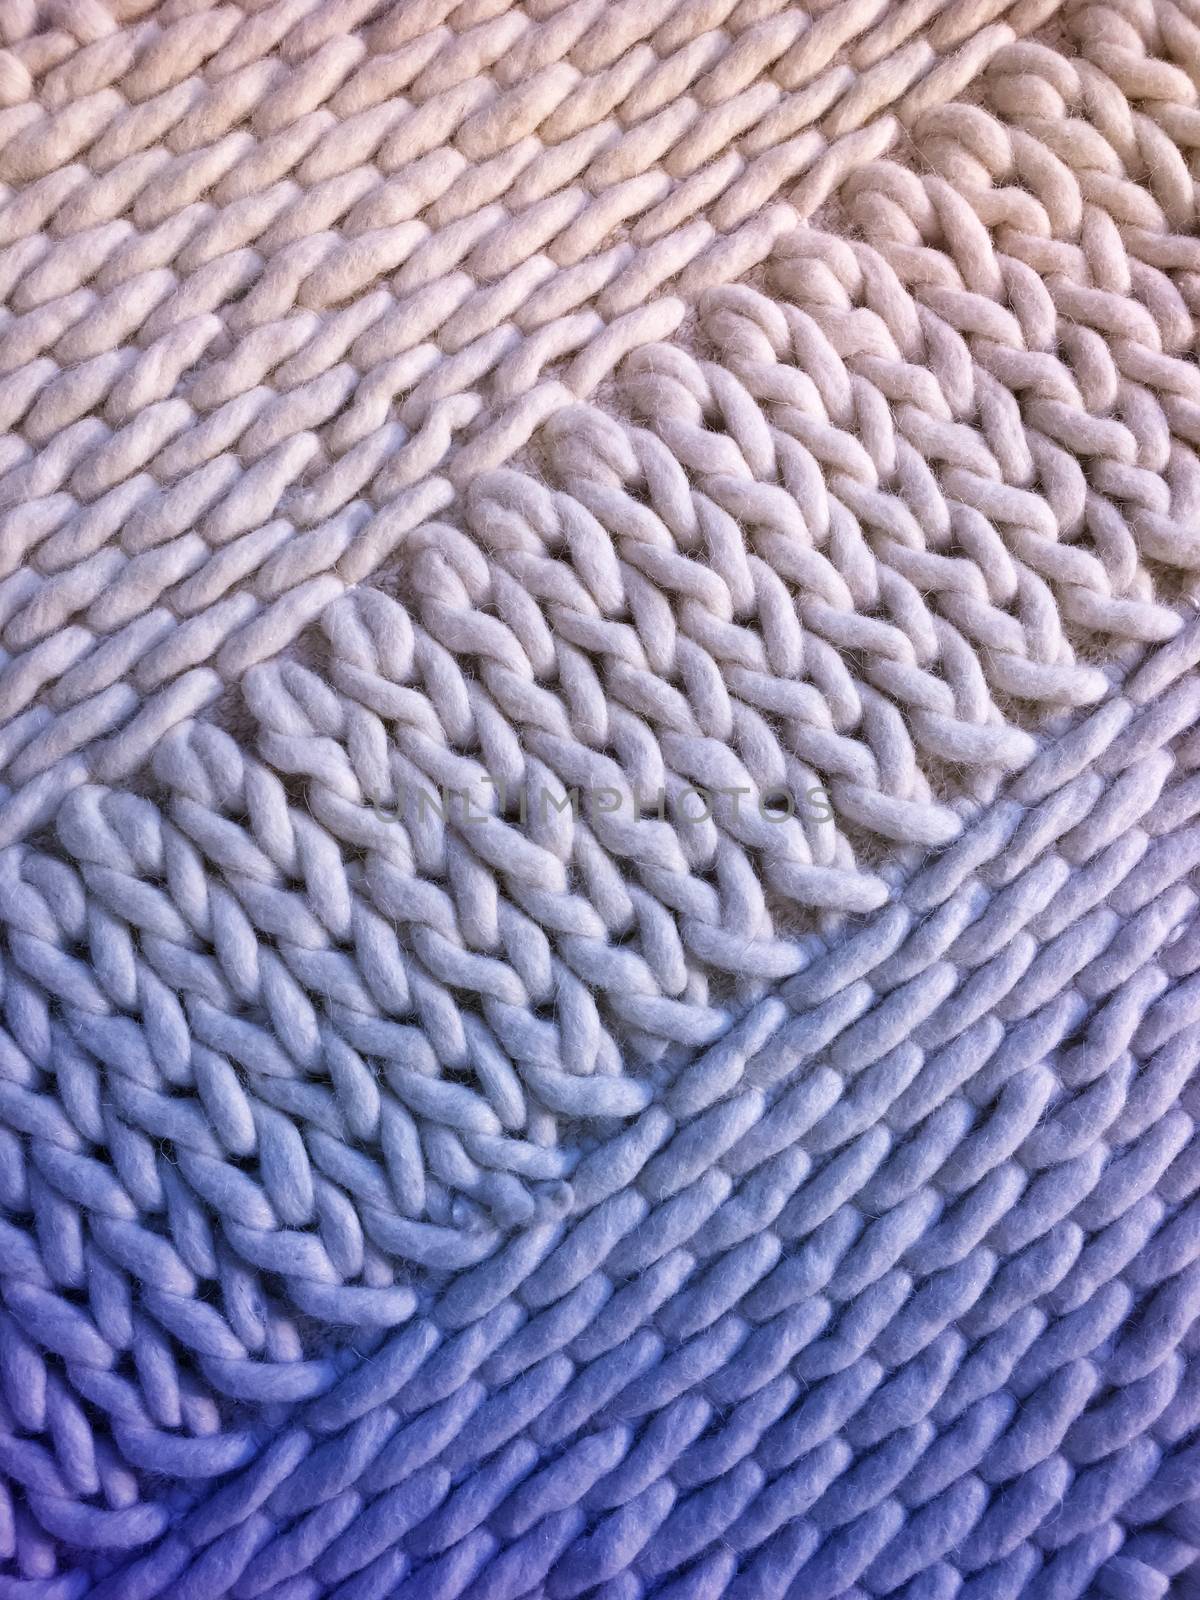 White and blue handmade knitted background by anikasalsera